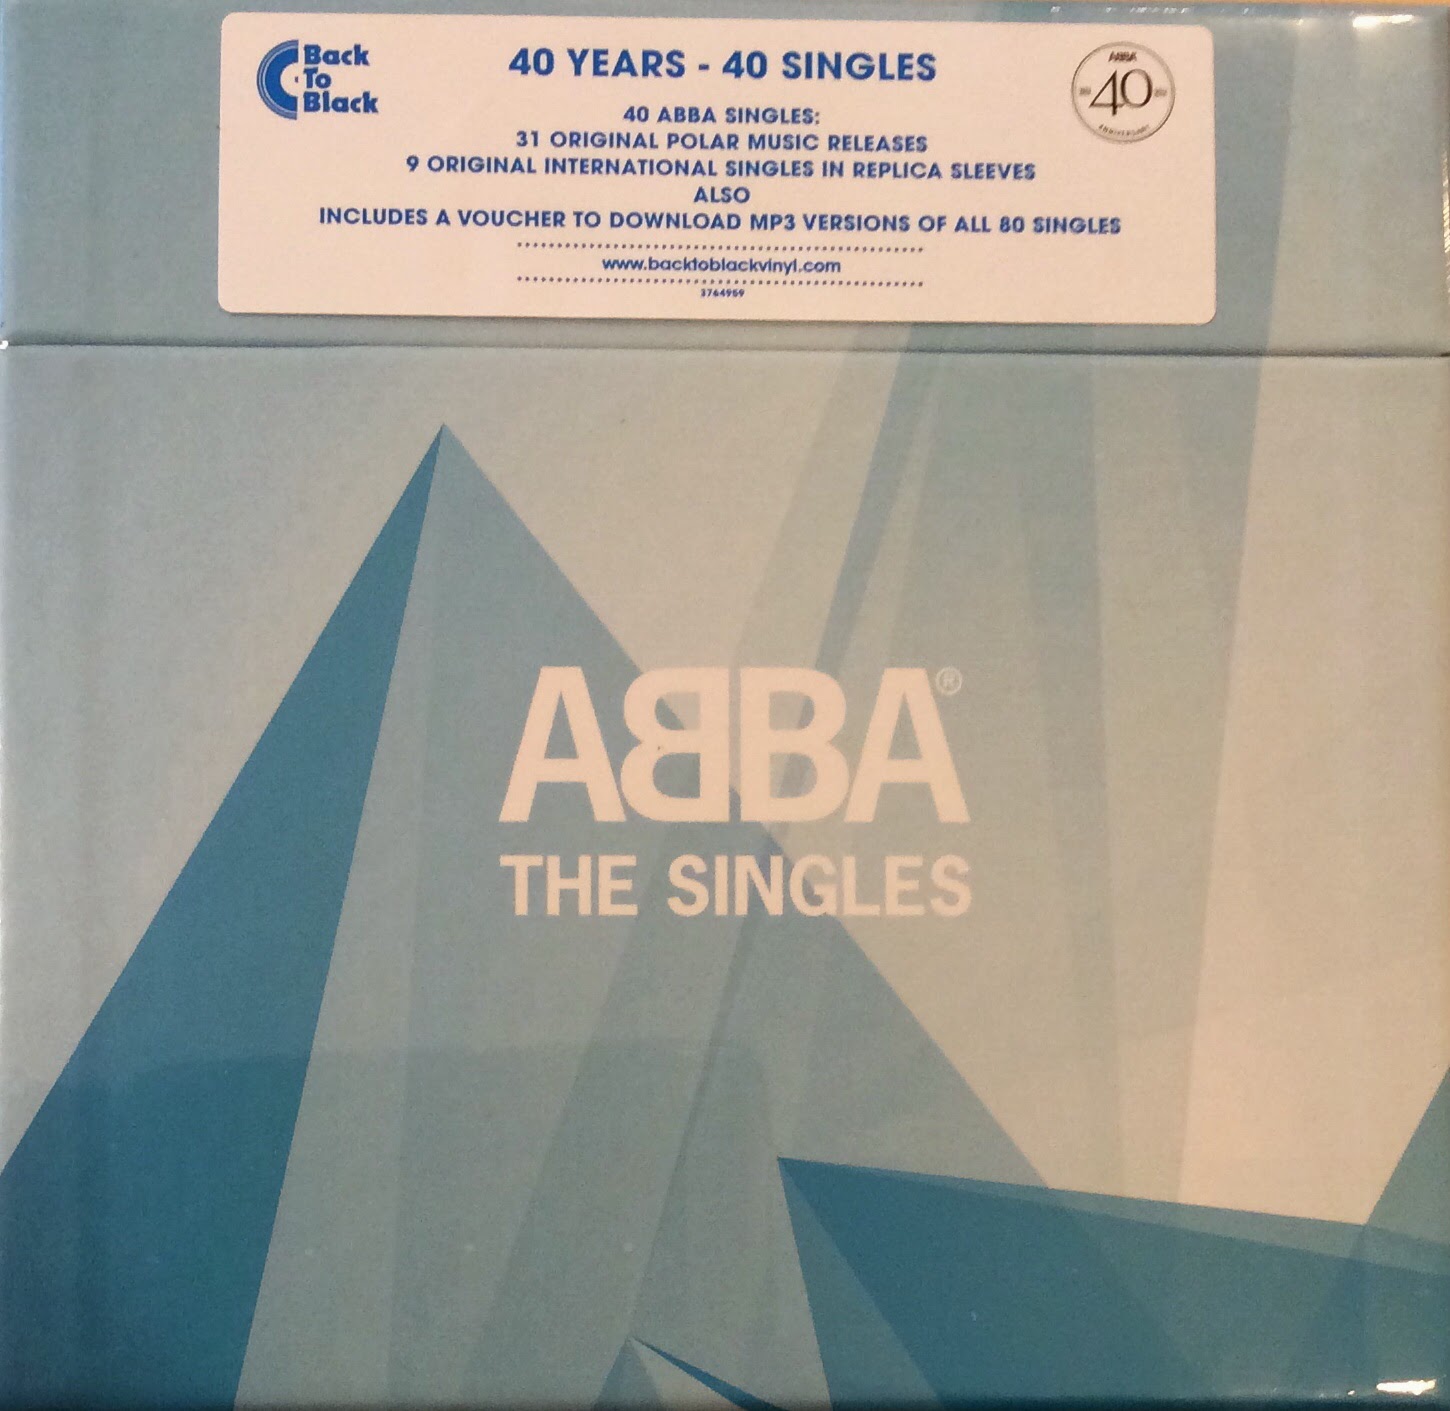 ABBA Fans Blog: Collection Update - Abba The Singles Box